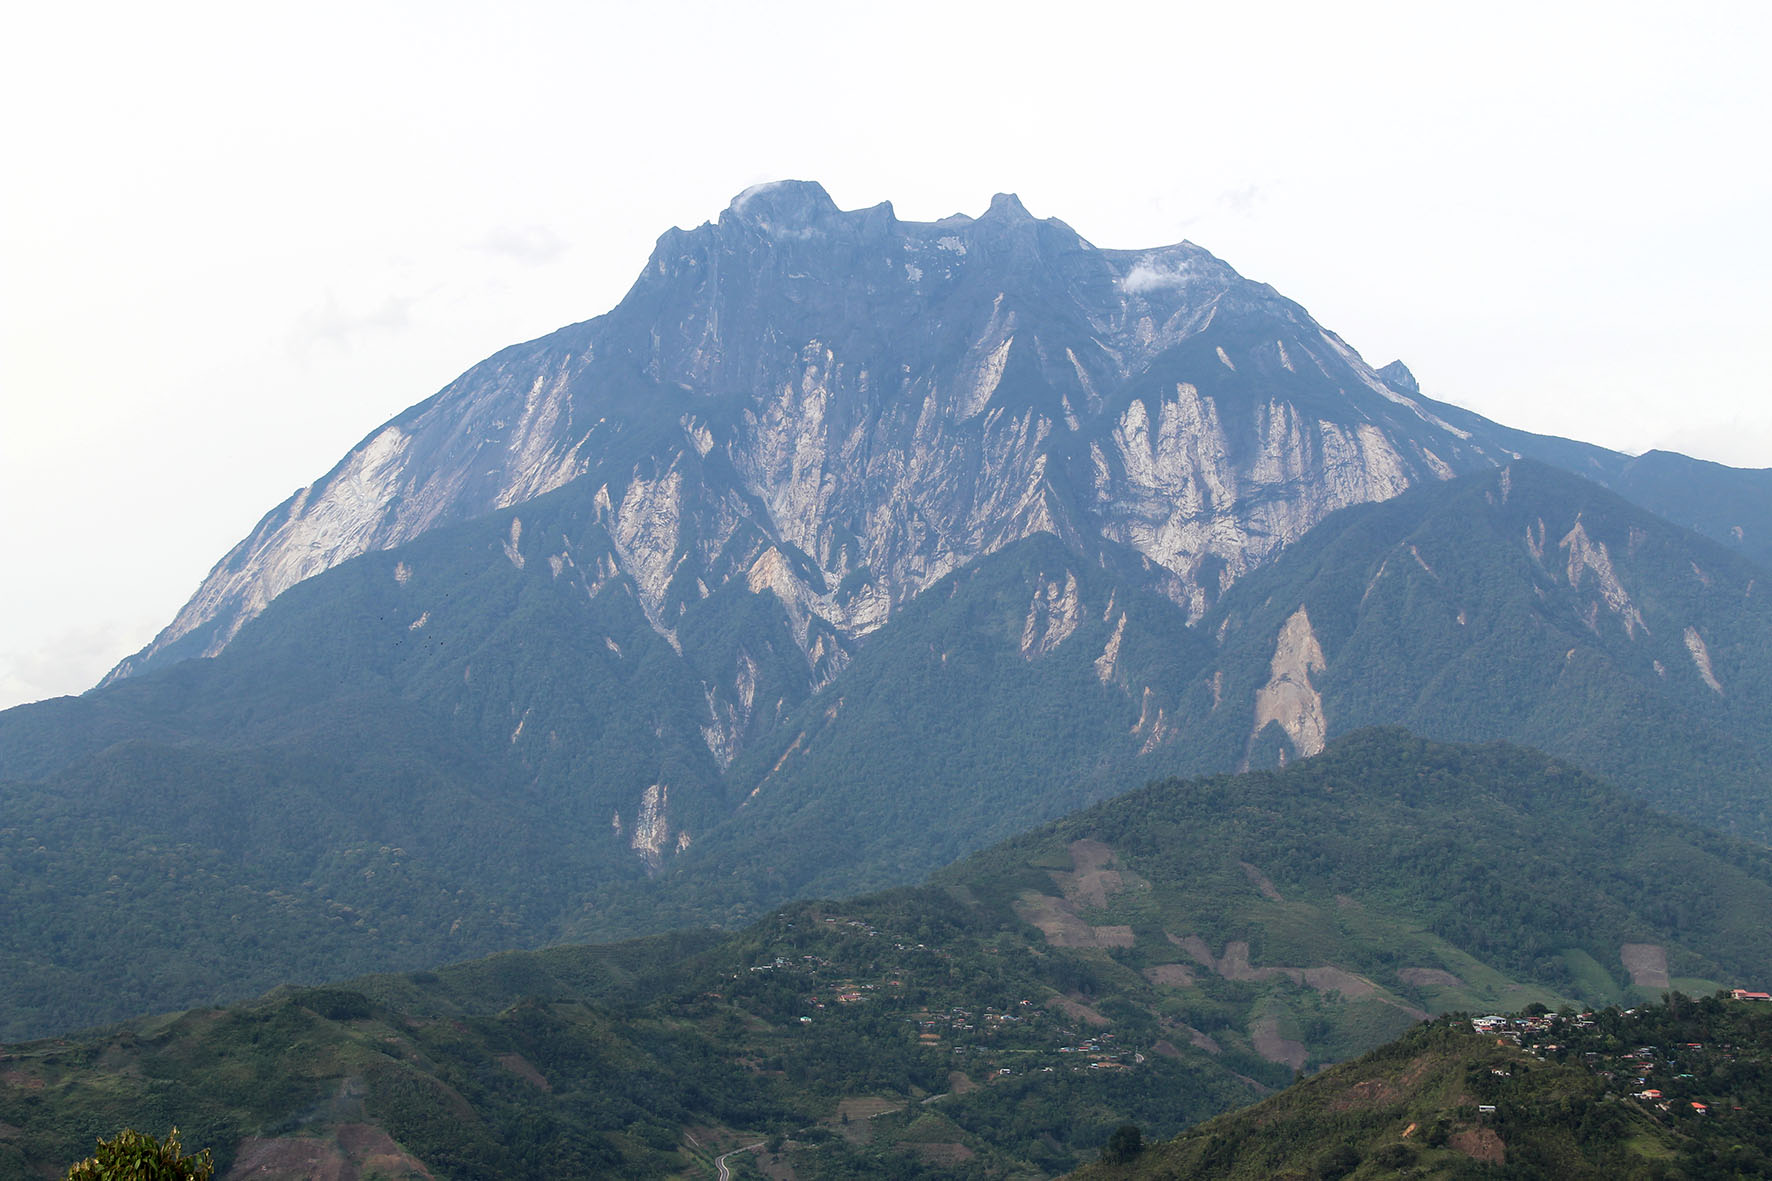 View of Mount Kinabalu from Pekan Nabalu, a small town at which tourists visiting the mountain would stop. Trails of rock debris can be seen on the slopes of the mountain where landslides had occurred (Source: Yvonne Soon)